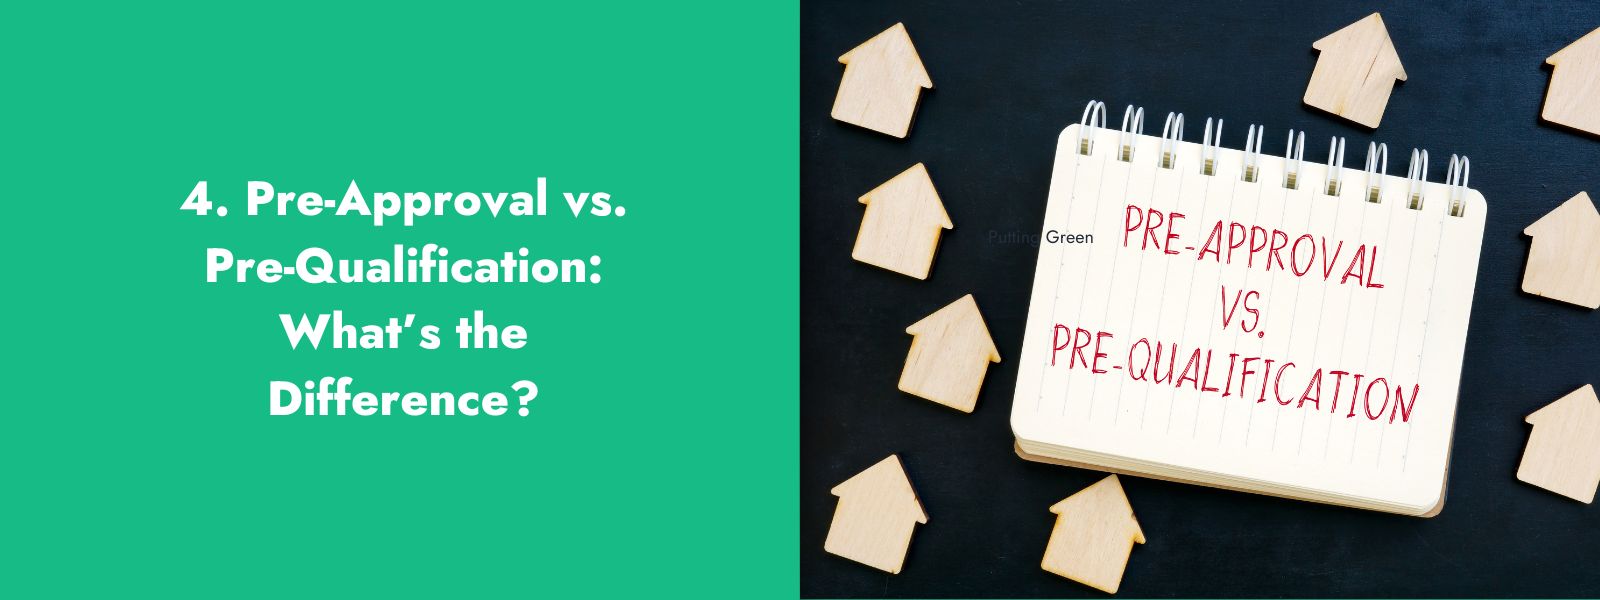 4. Pre-Approval vs. Pre-Qualification_ What’s the Difference